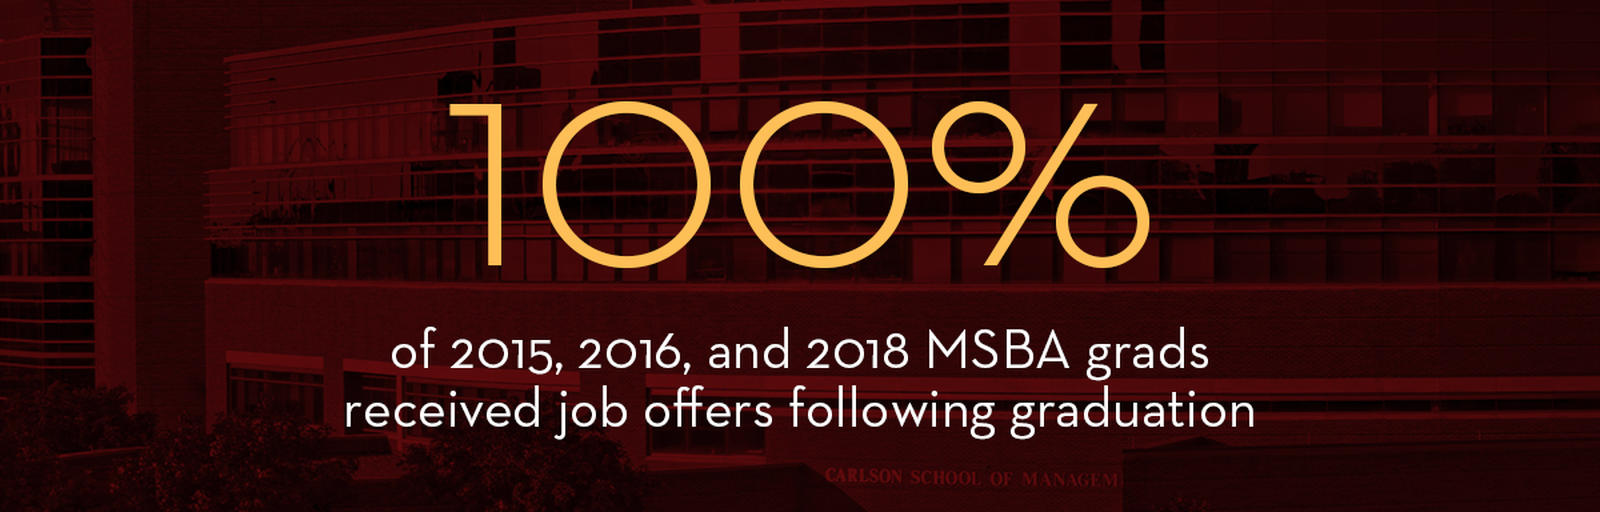 MSBA Placement at 100 Percent